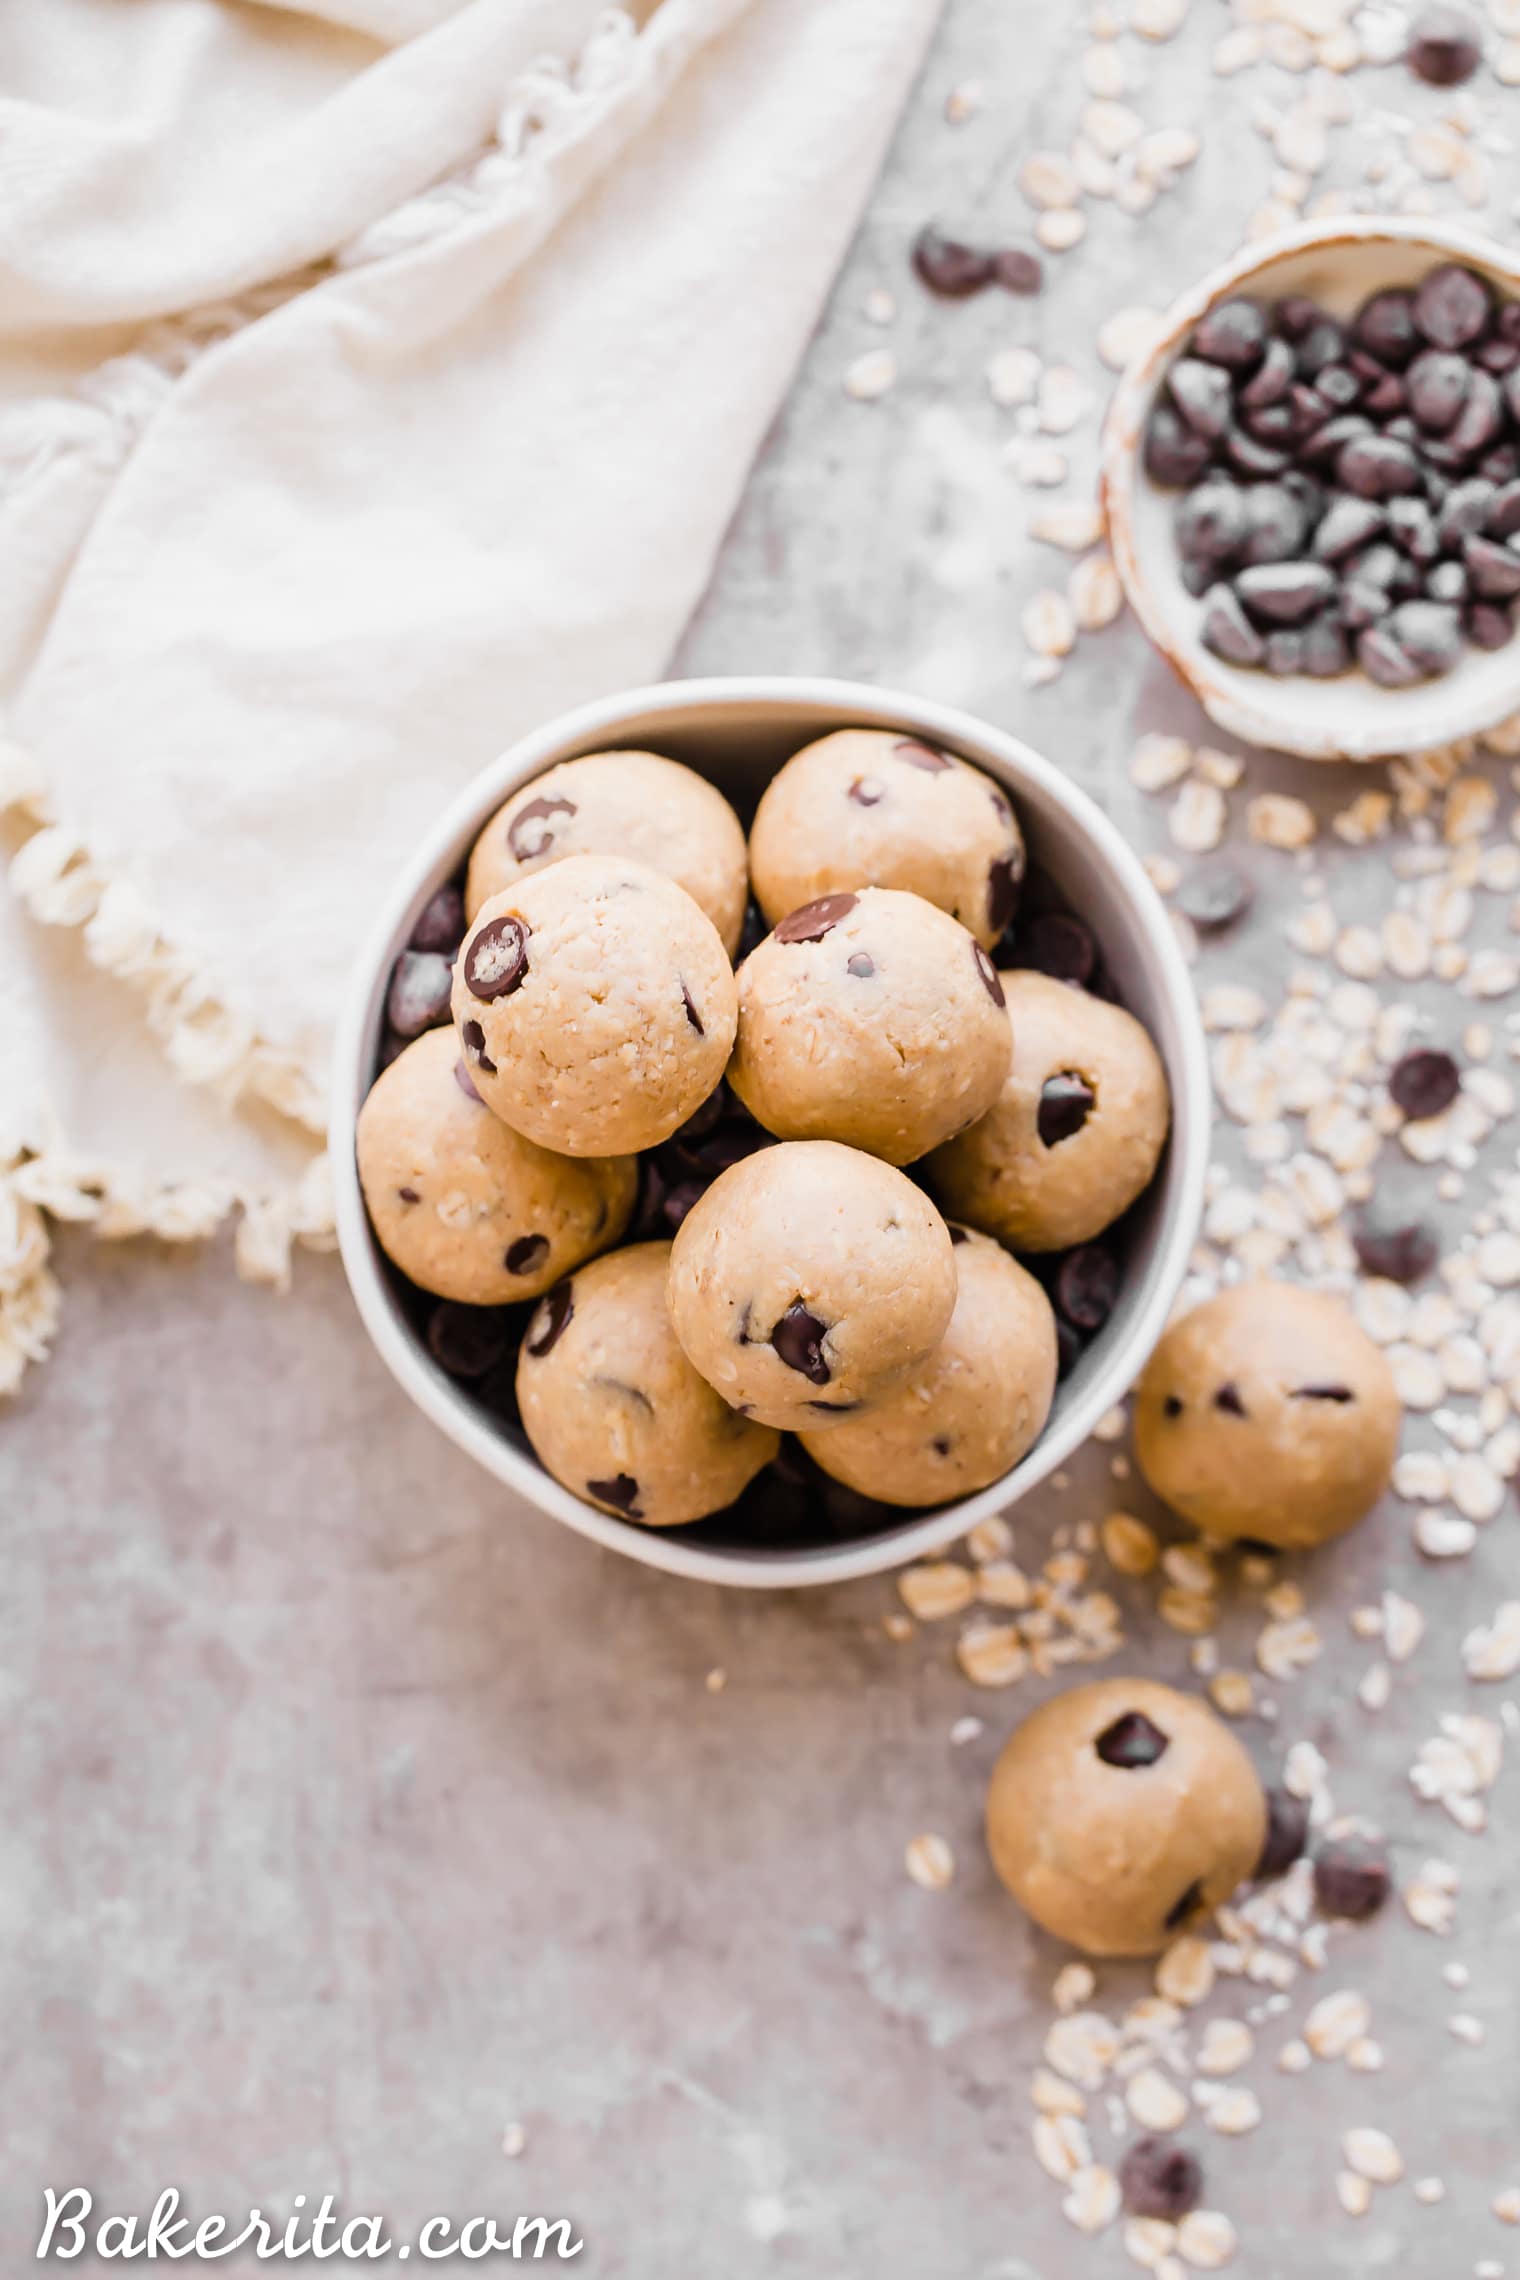 Oatmeal Chocolate Chip Cookie Dough Bites: Gluten Free & Vegan. Stacked in a bowl with oats and chocolate chips.